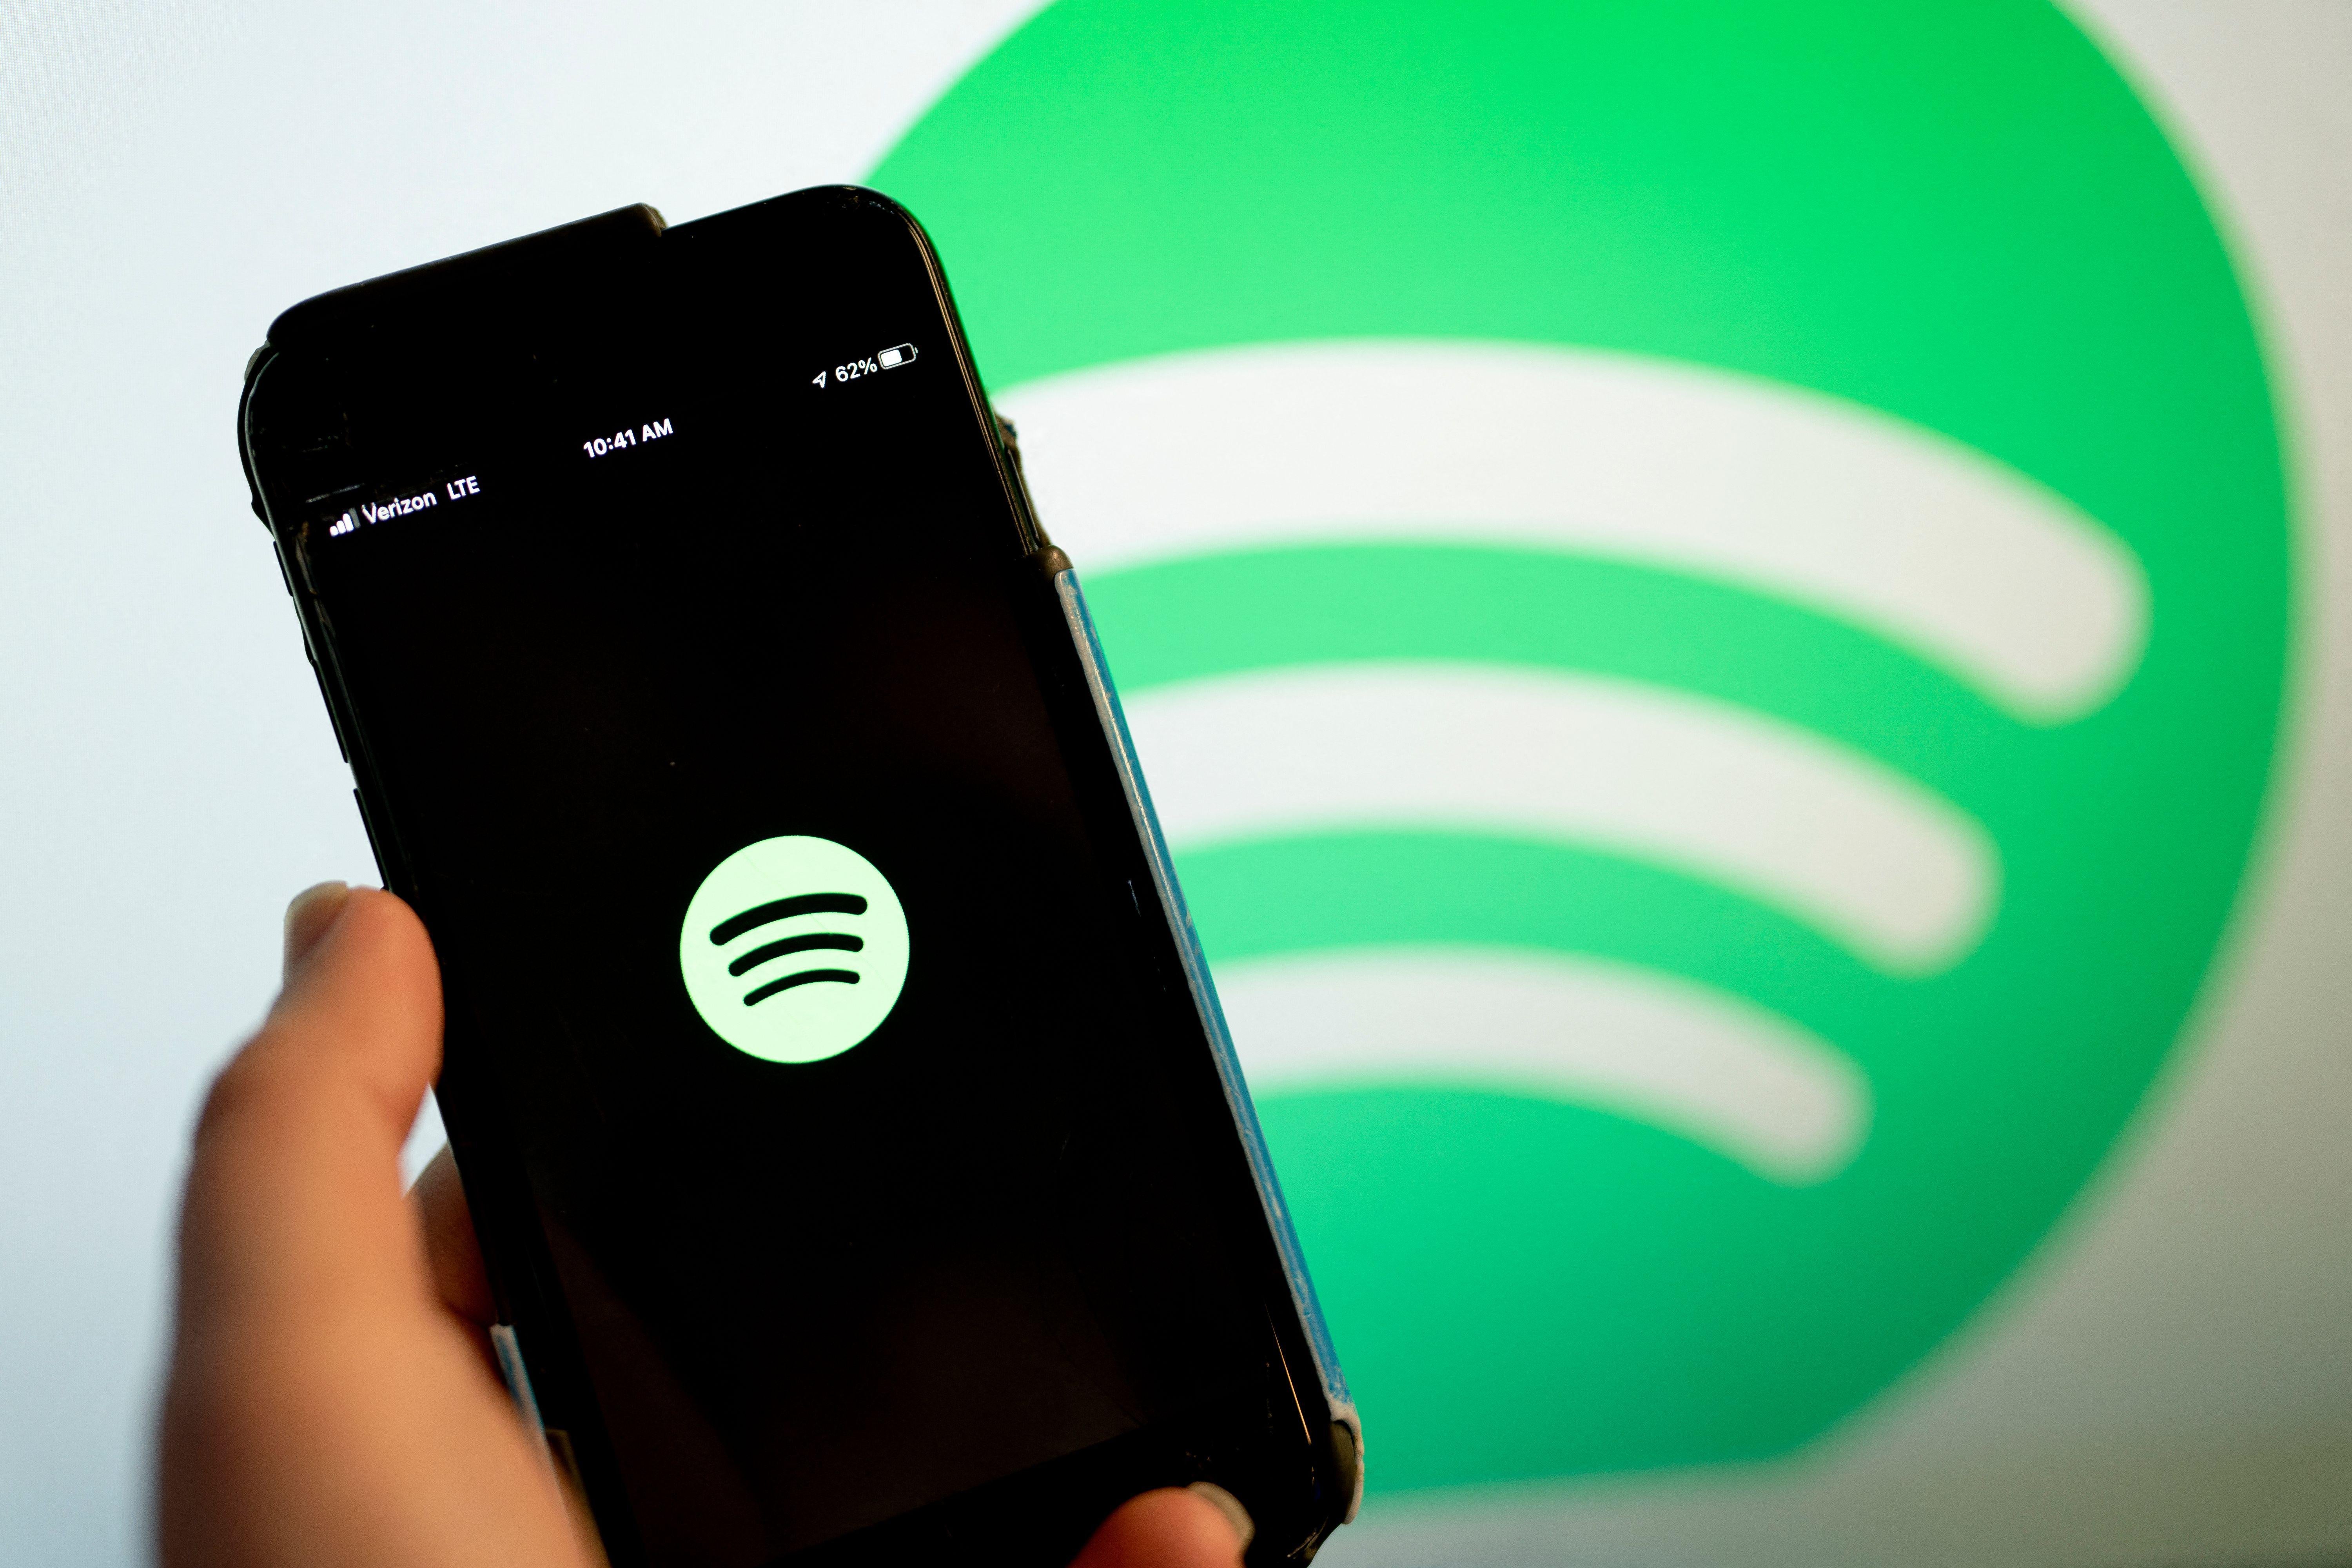 In front of a large Spotify logo, a hand holds a smartphone that displays another Spotify logo.